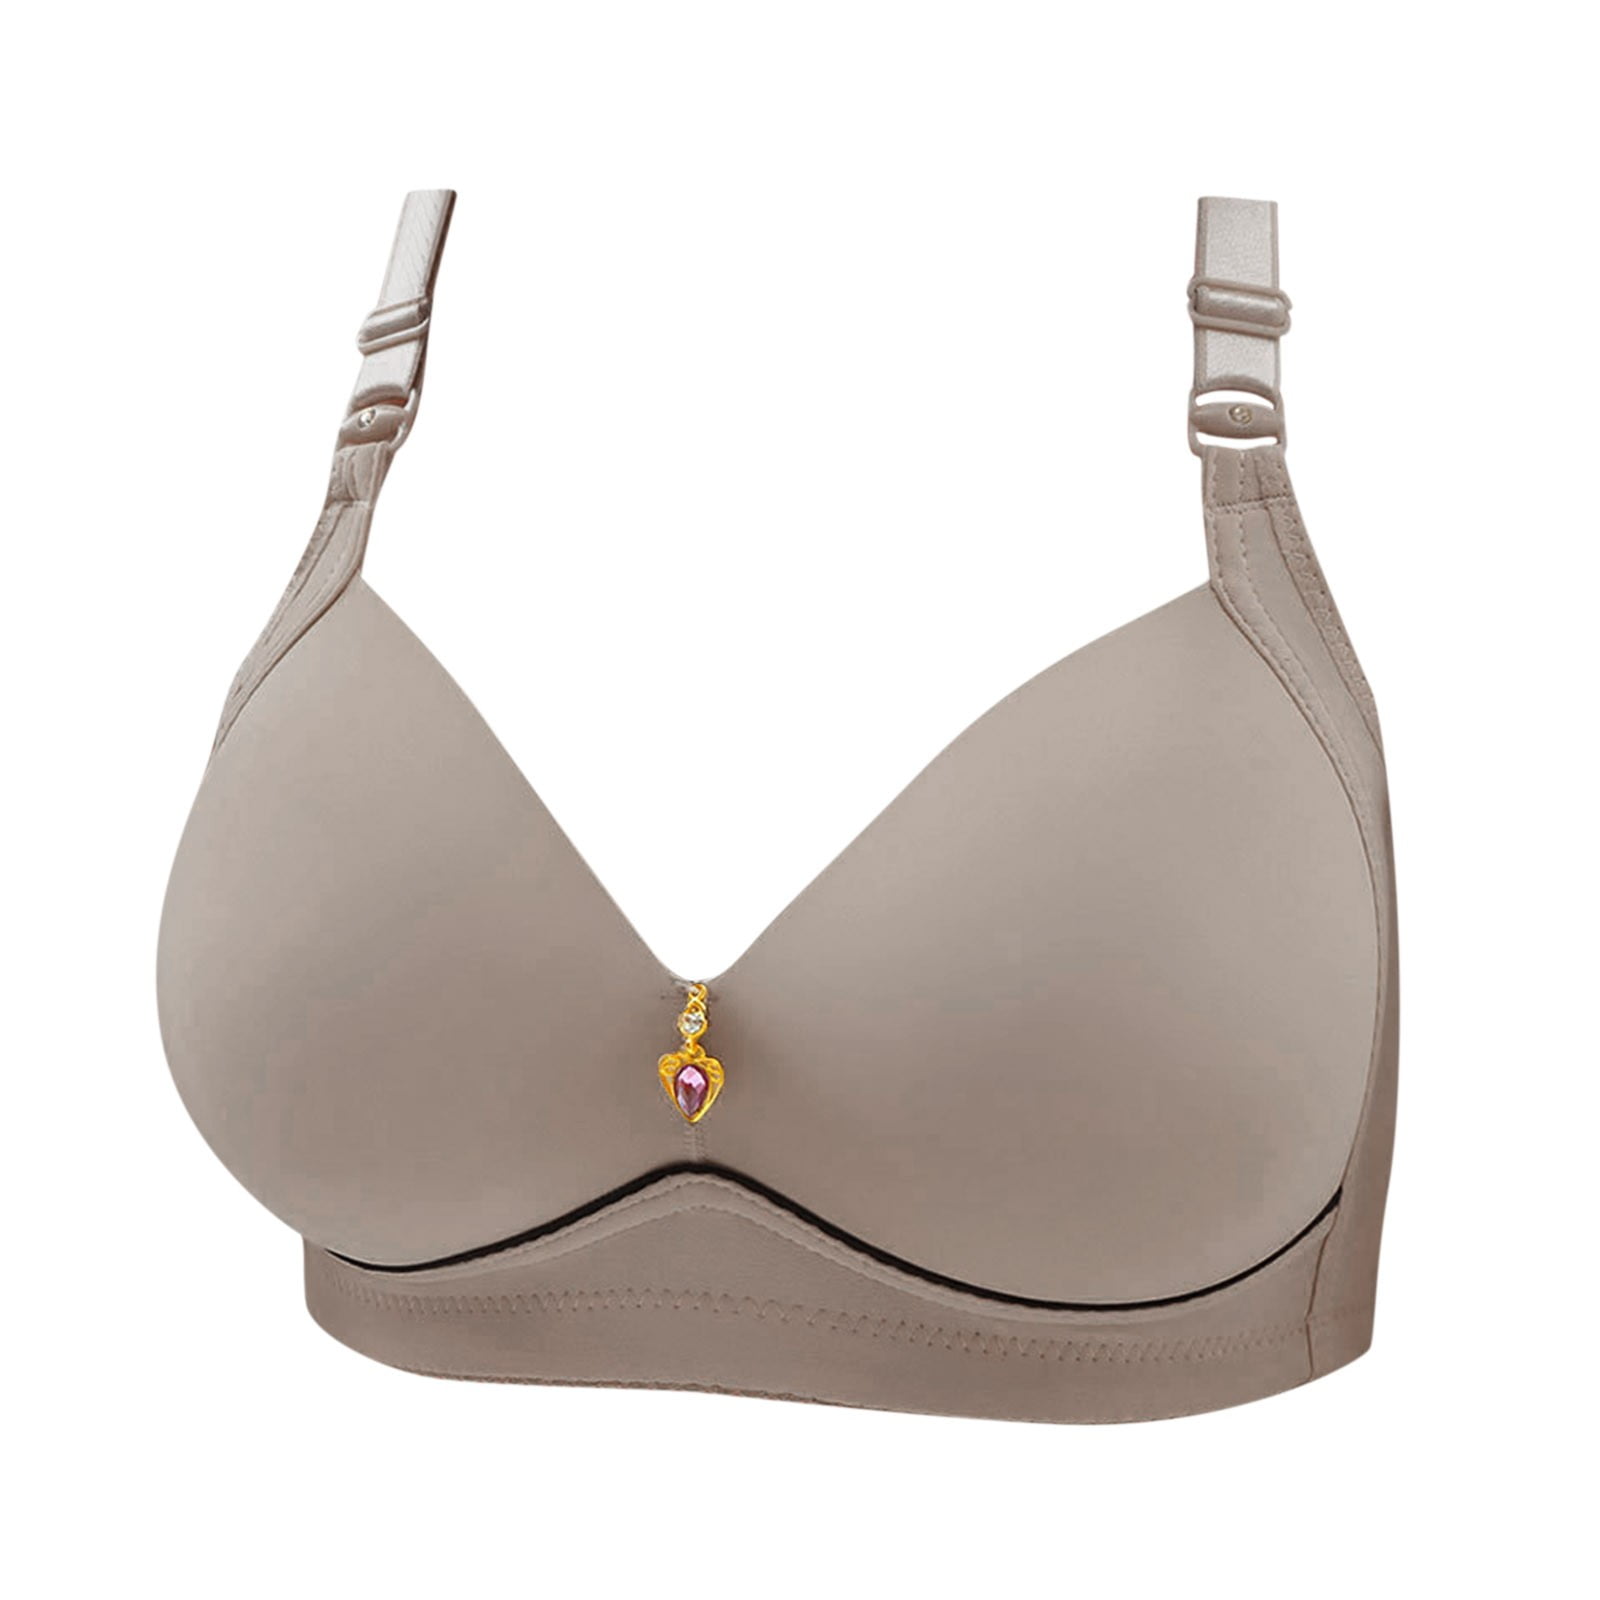 Bigersell Cotton Bras for Women Clearance Comfortable Bras for